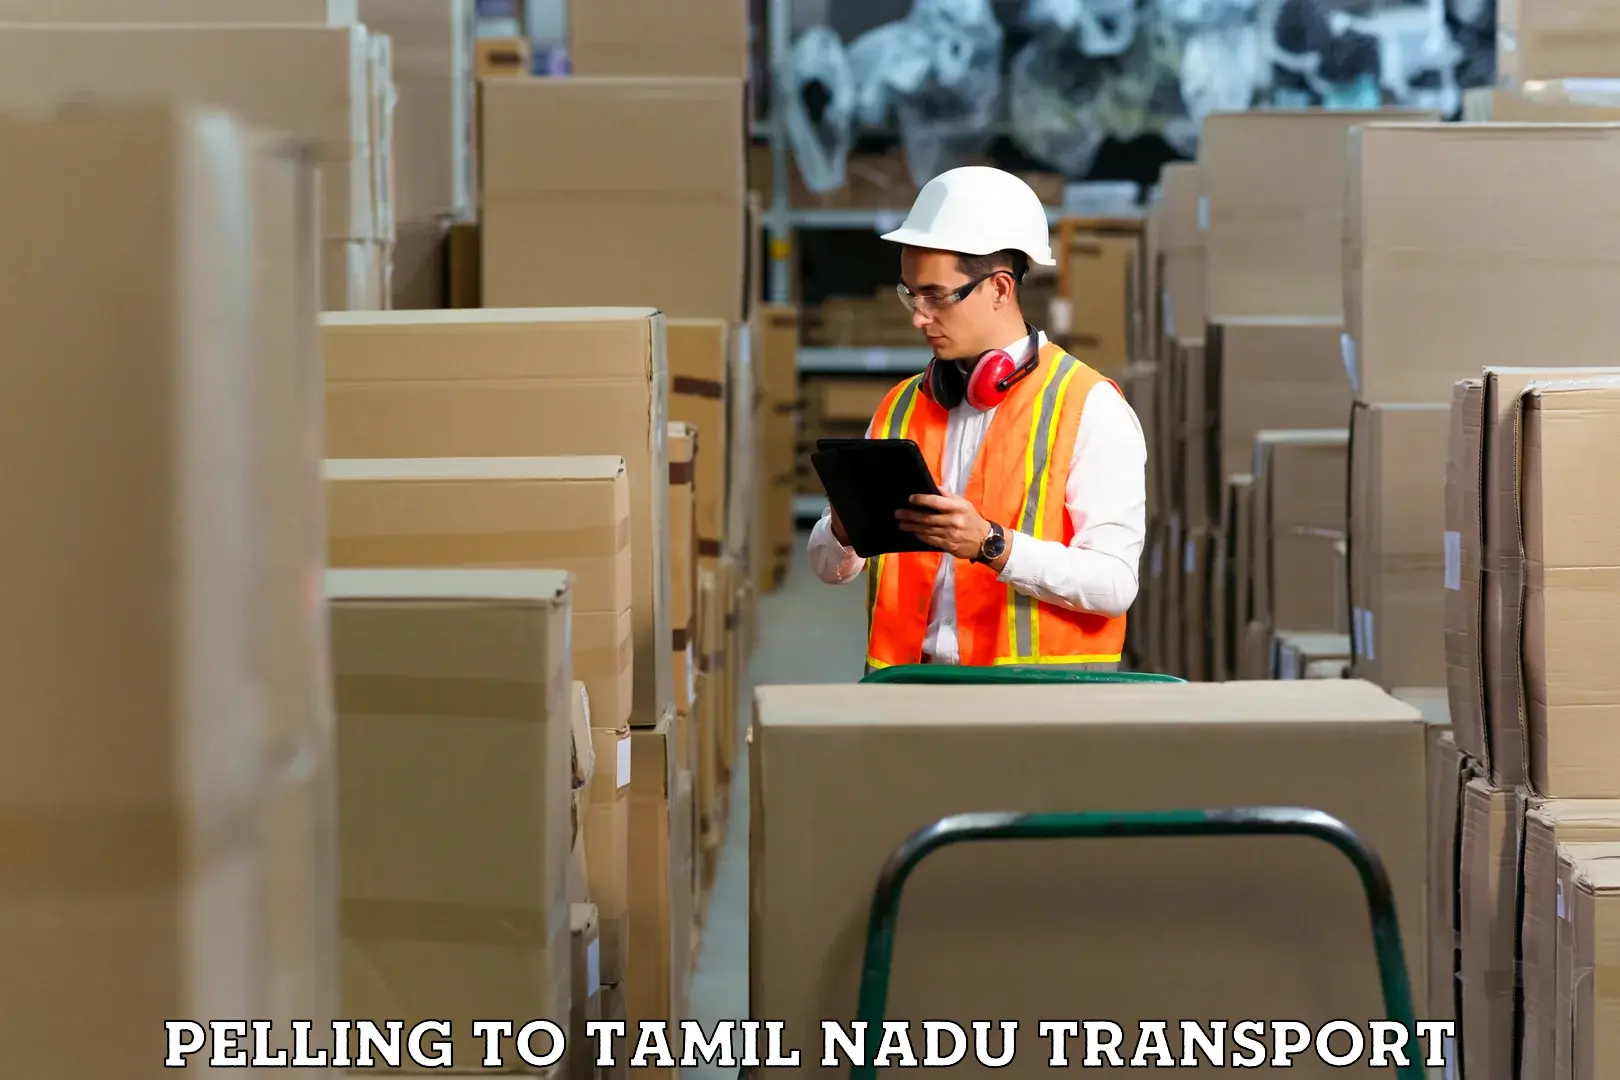 Domestic goods transportation services Pelling to Chennai Port